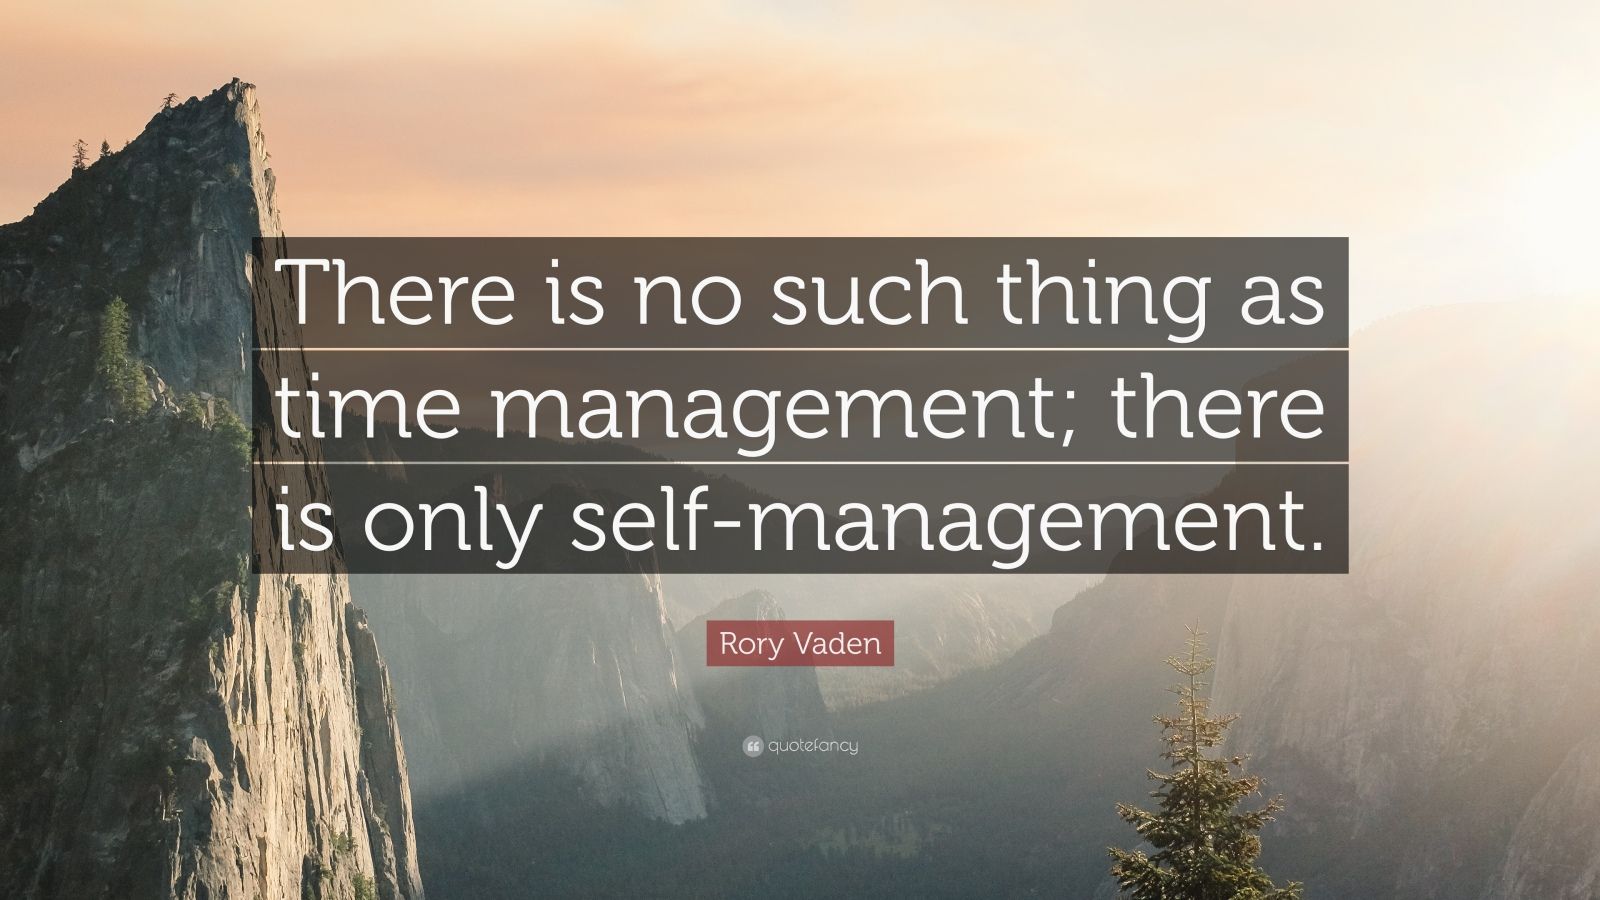 Rory Vaden Quote: “There is no such thing as time management; there is